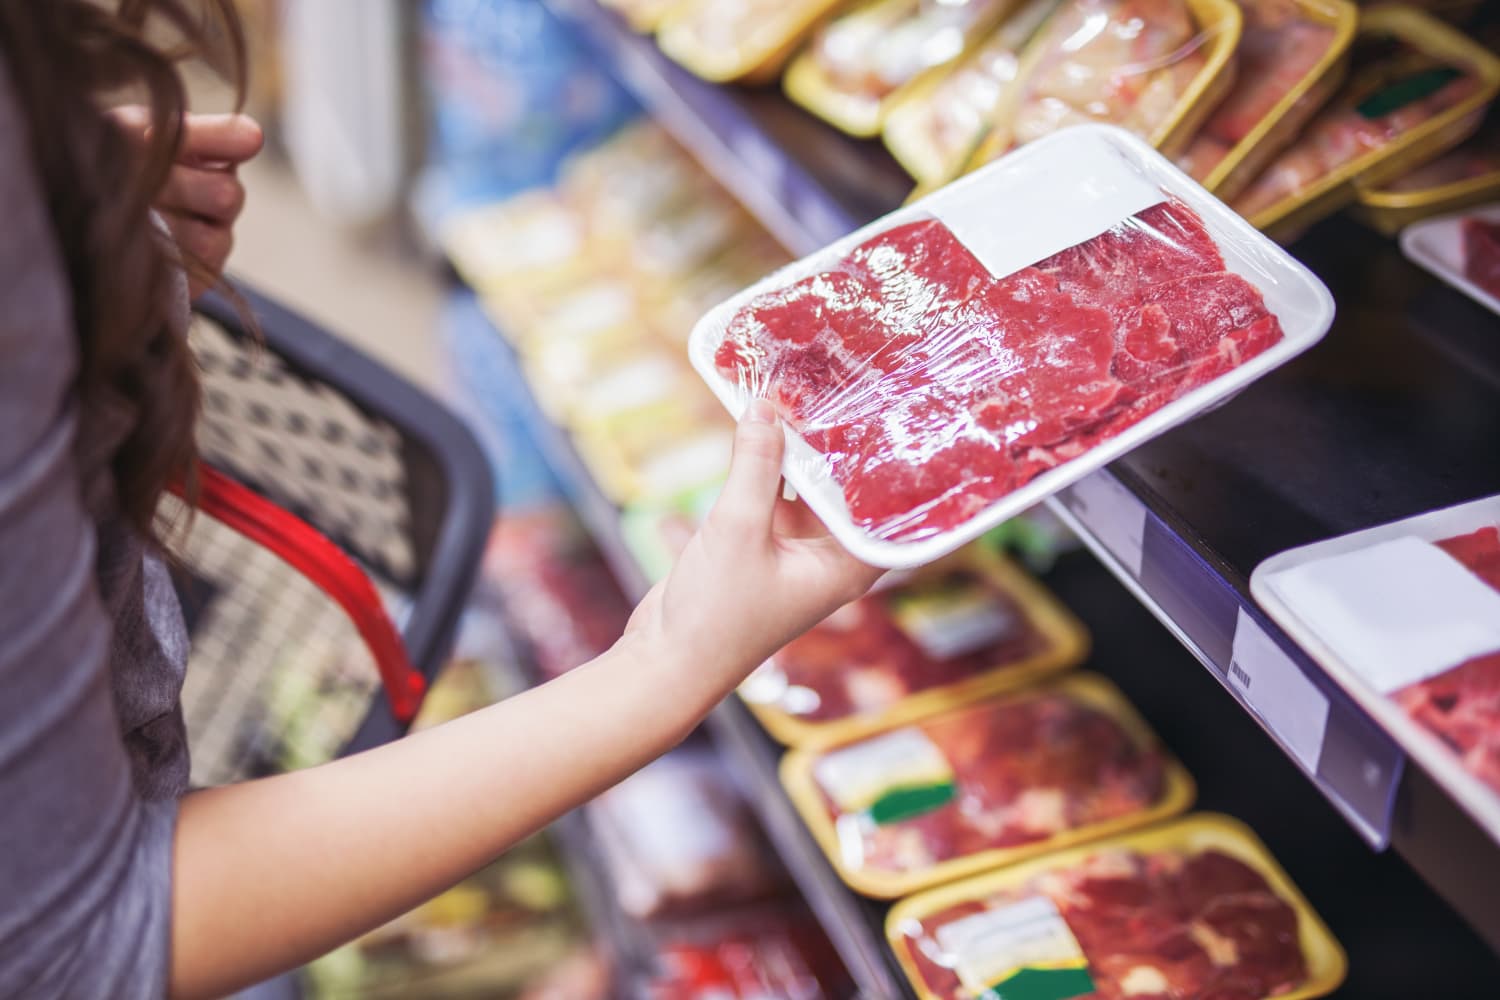 Should We Even Be Buying Meat Right Now? We Asked 4 Food Experts.